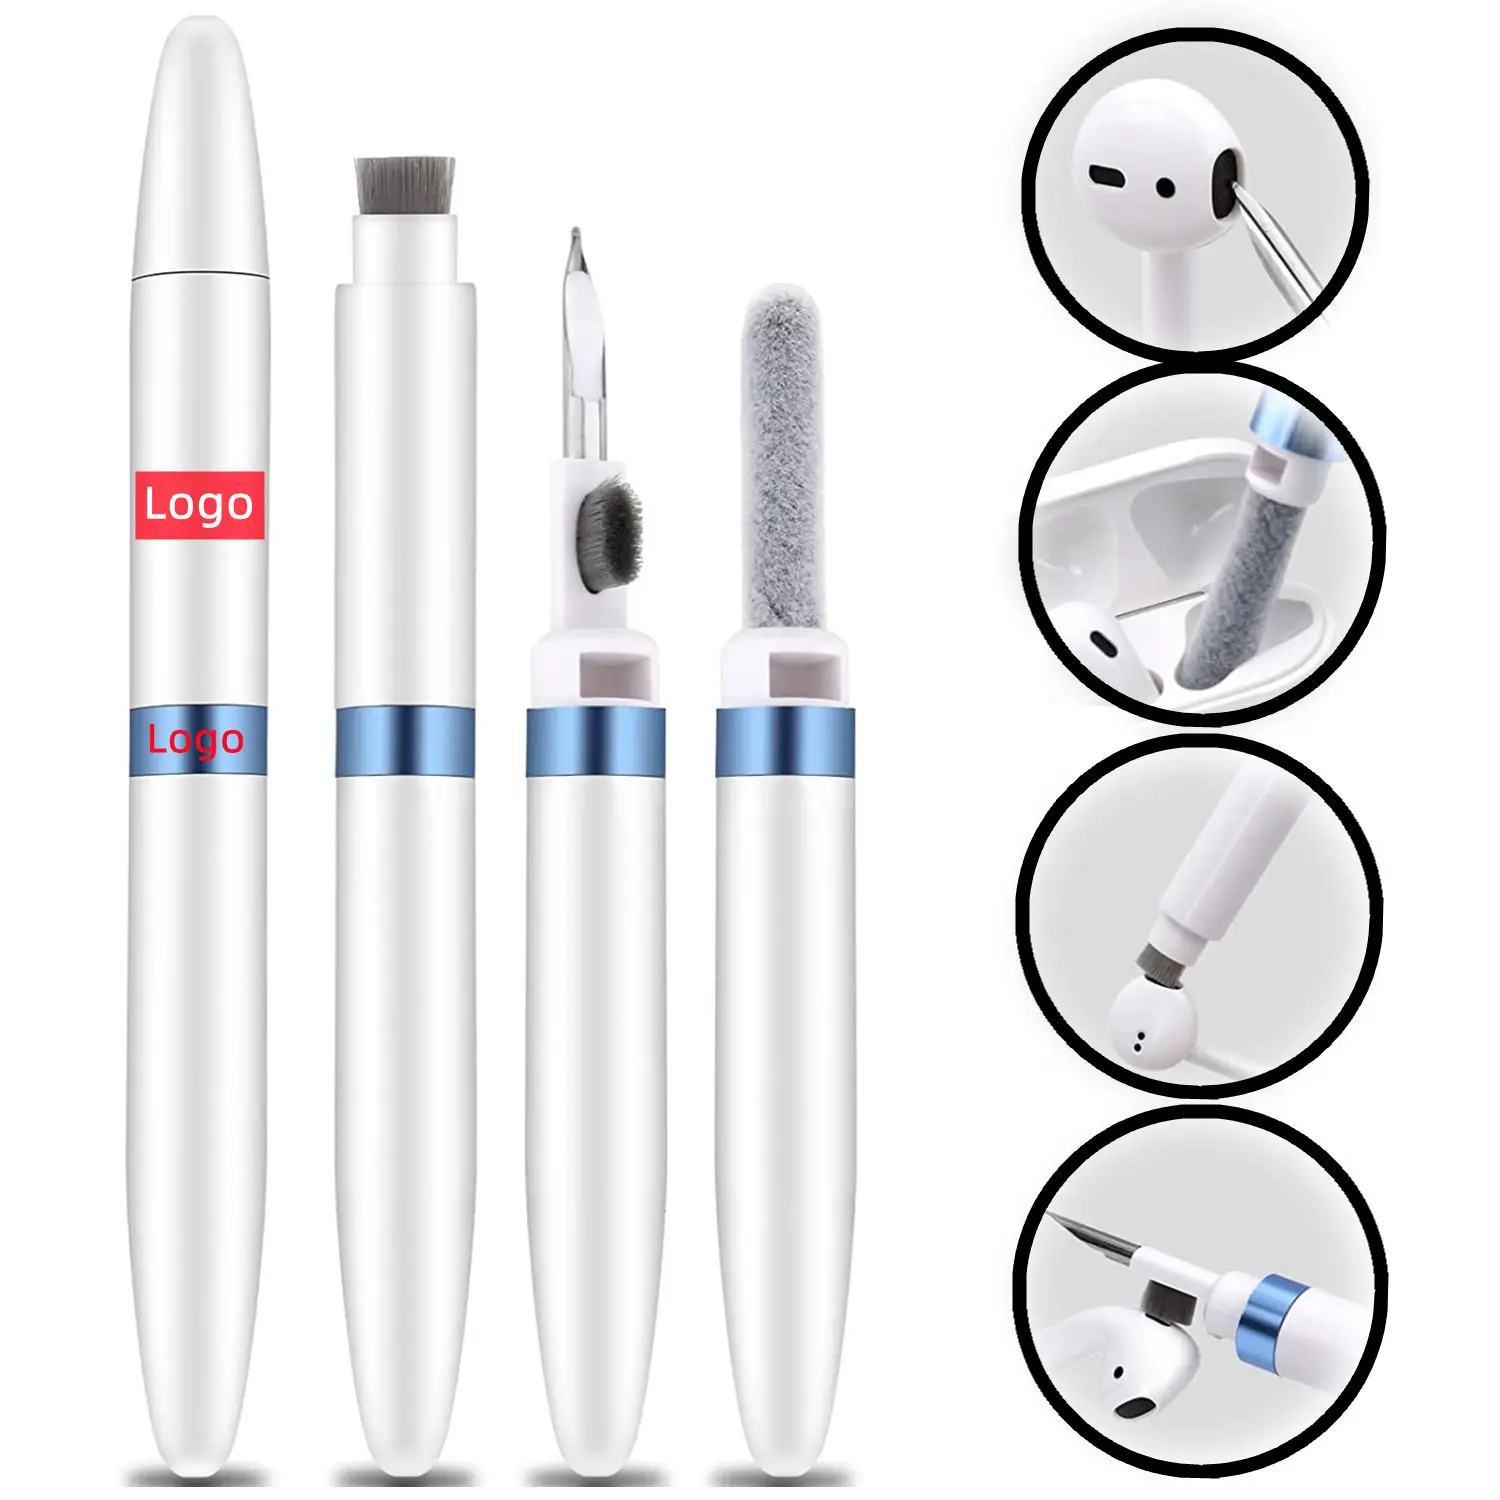 Custom Logo Multi Use 4 in 1 Wireless Earbuds Headphone Cleaning Tool Brush Cleaner Kit for Airpod Earbuds Cleaning Pen Brush